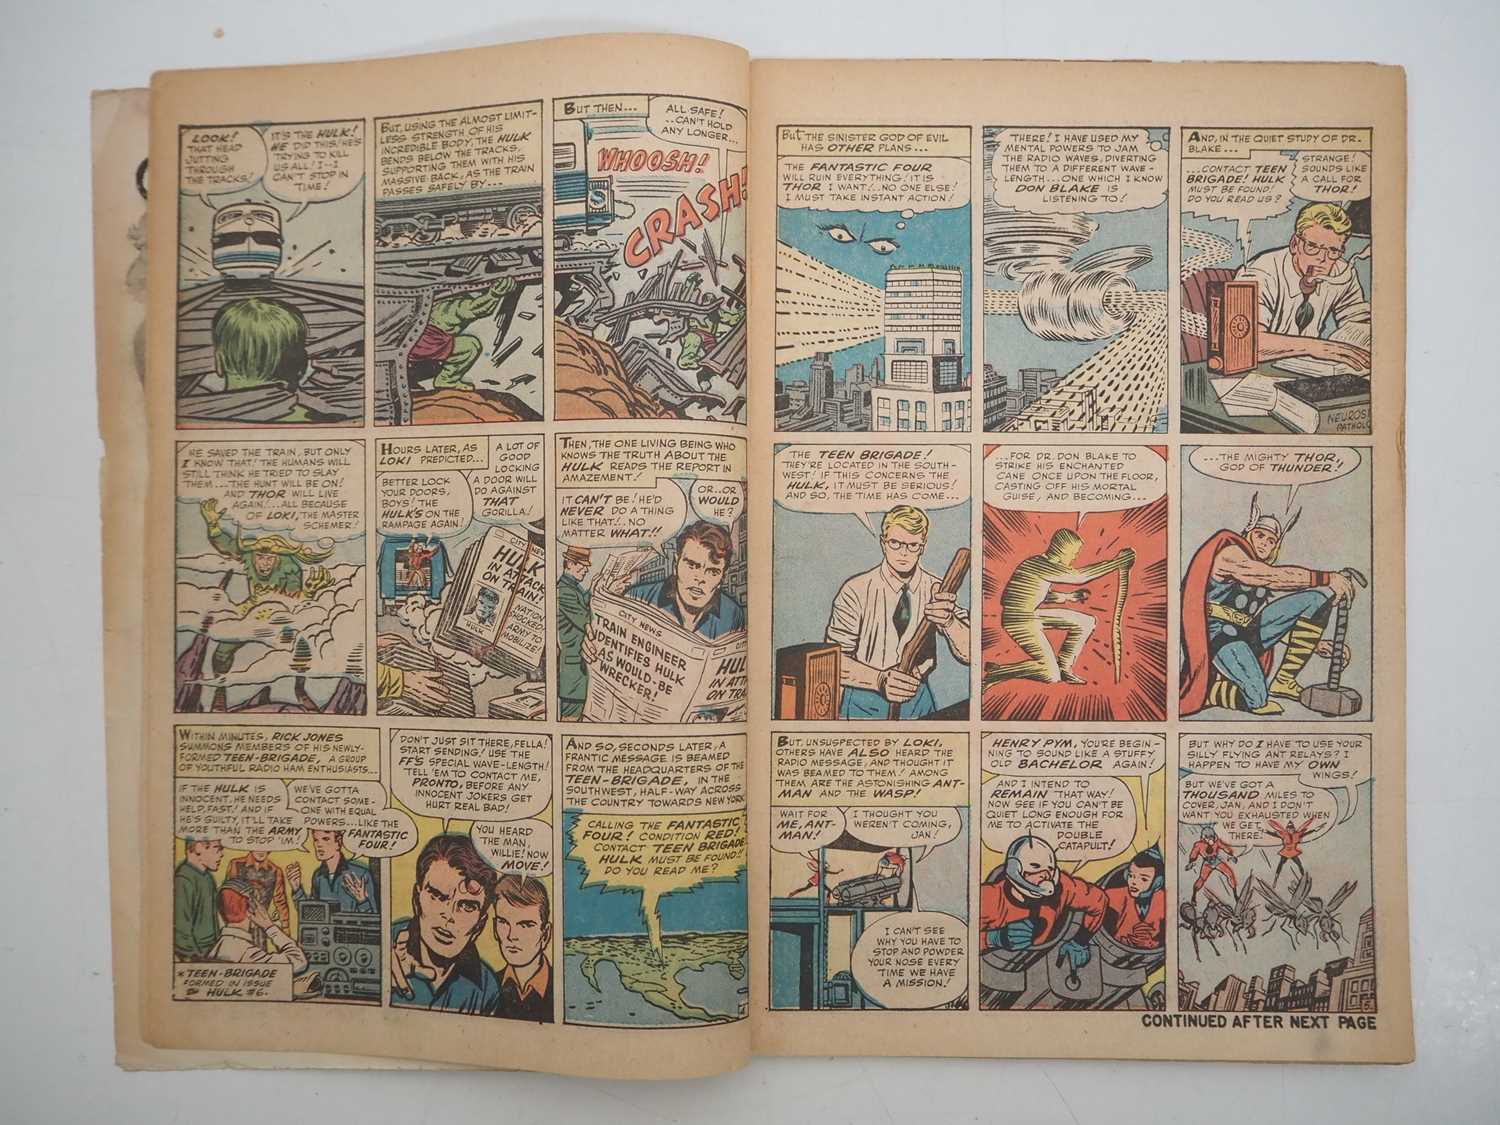 AVENGERS #1 - (1963 - MARVEL - UK Price Variant) - KEY Comic Book - First appearance of the Avengers - Image 10 of 29